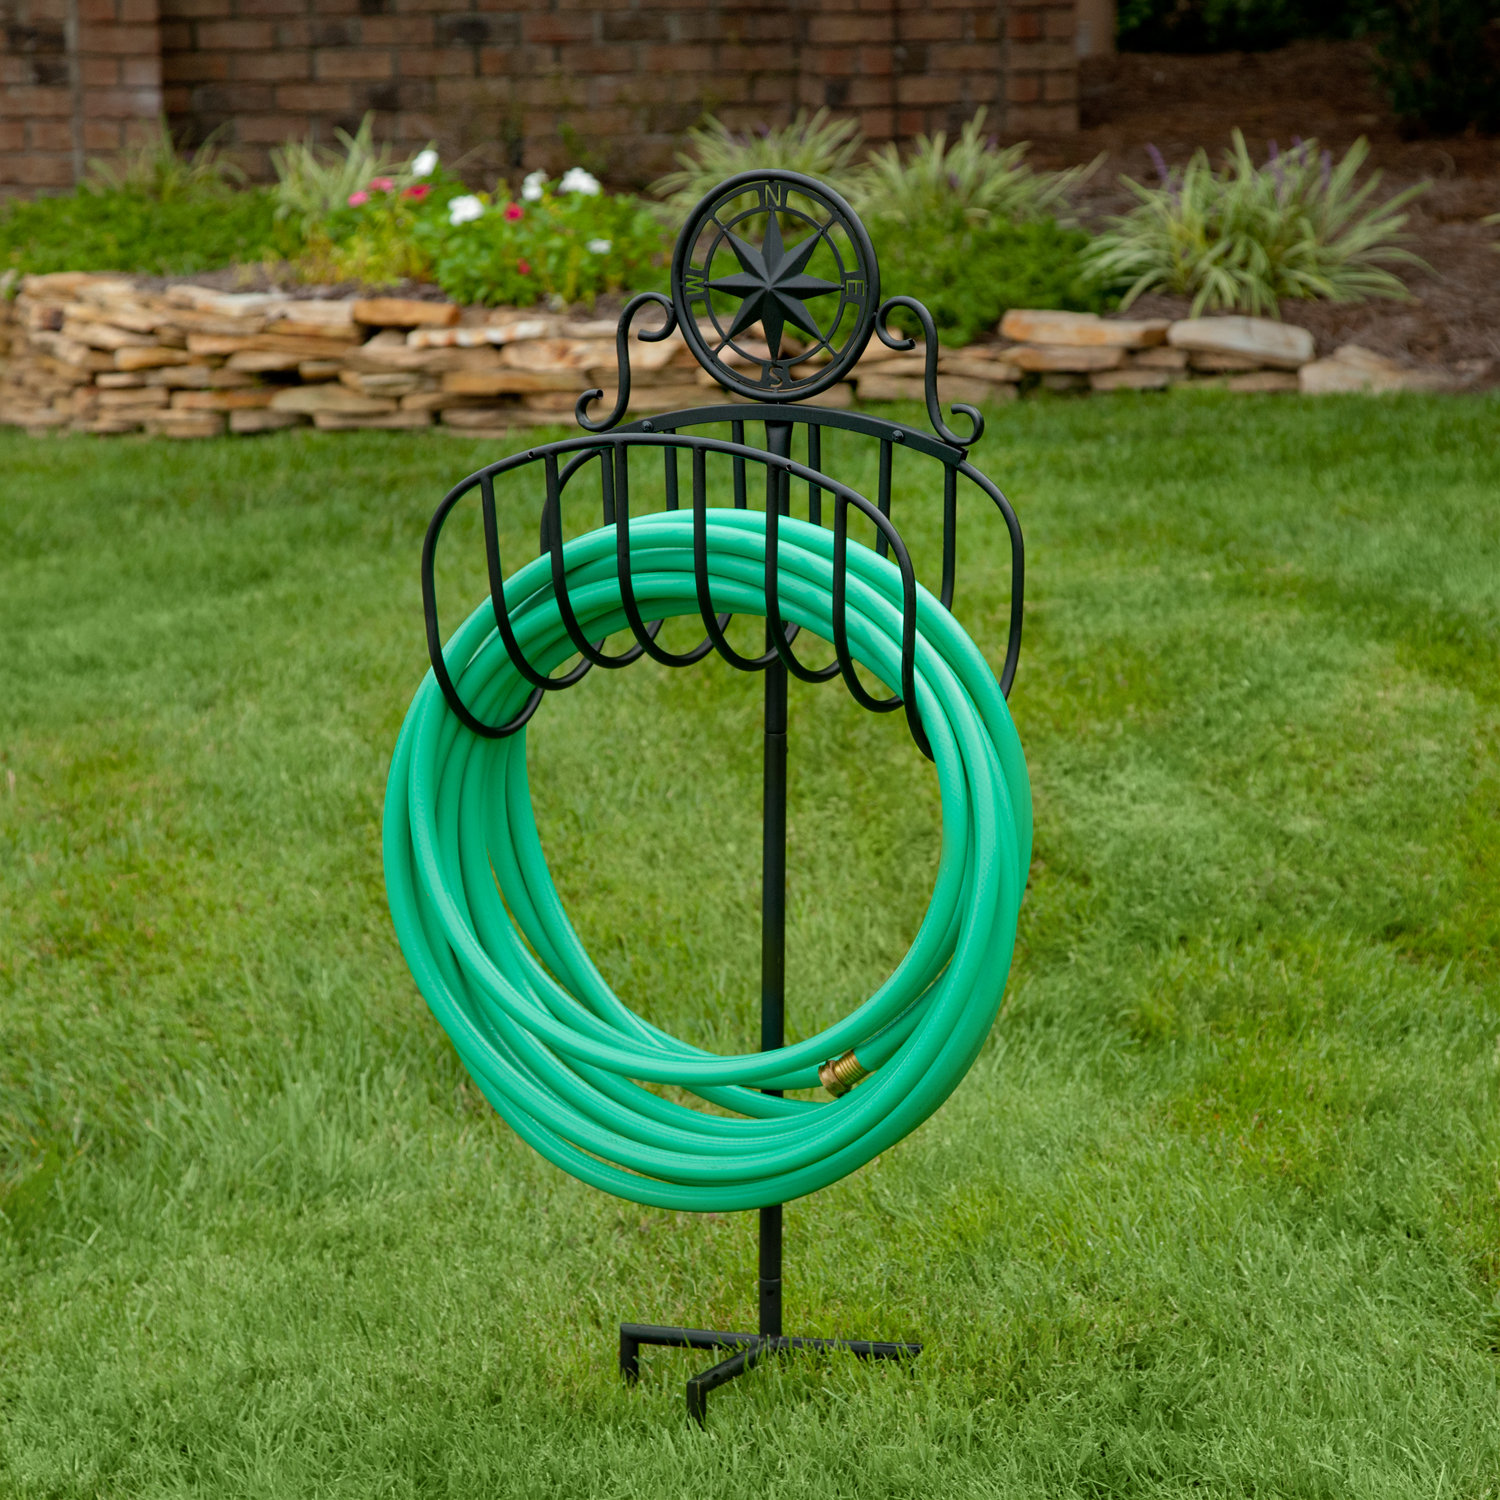 Patio Life Steel 150-ft Stand Hose Reel In The Garden Hose, 56% OFF